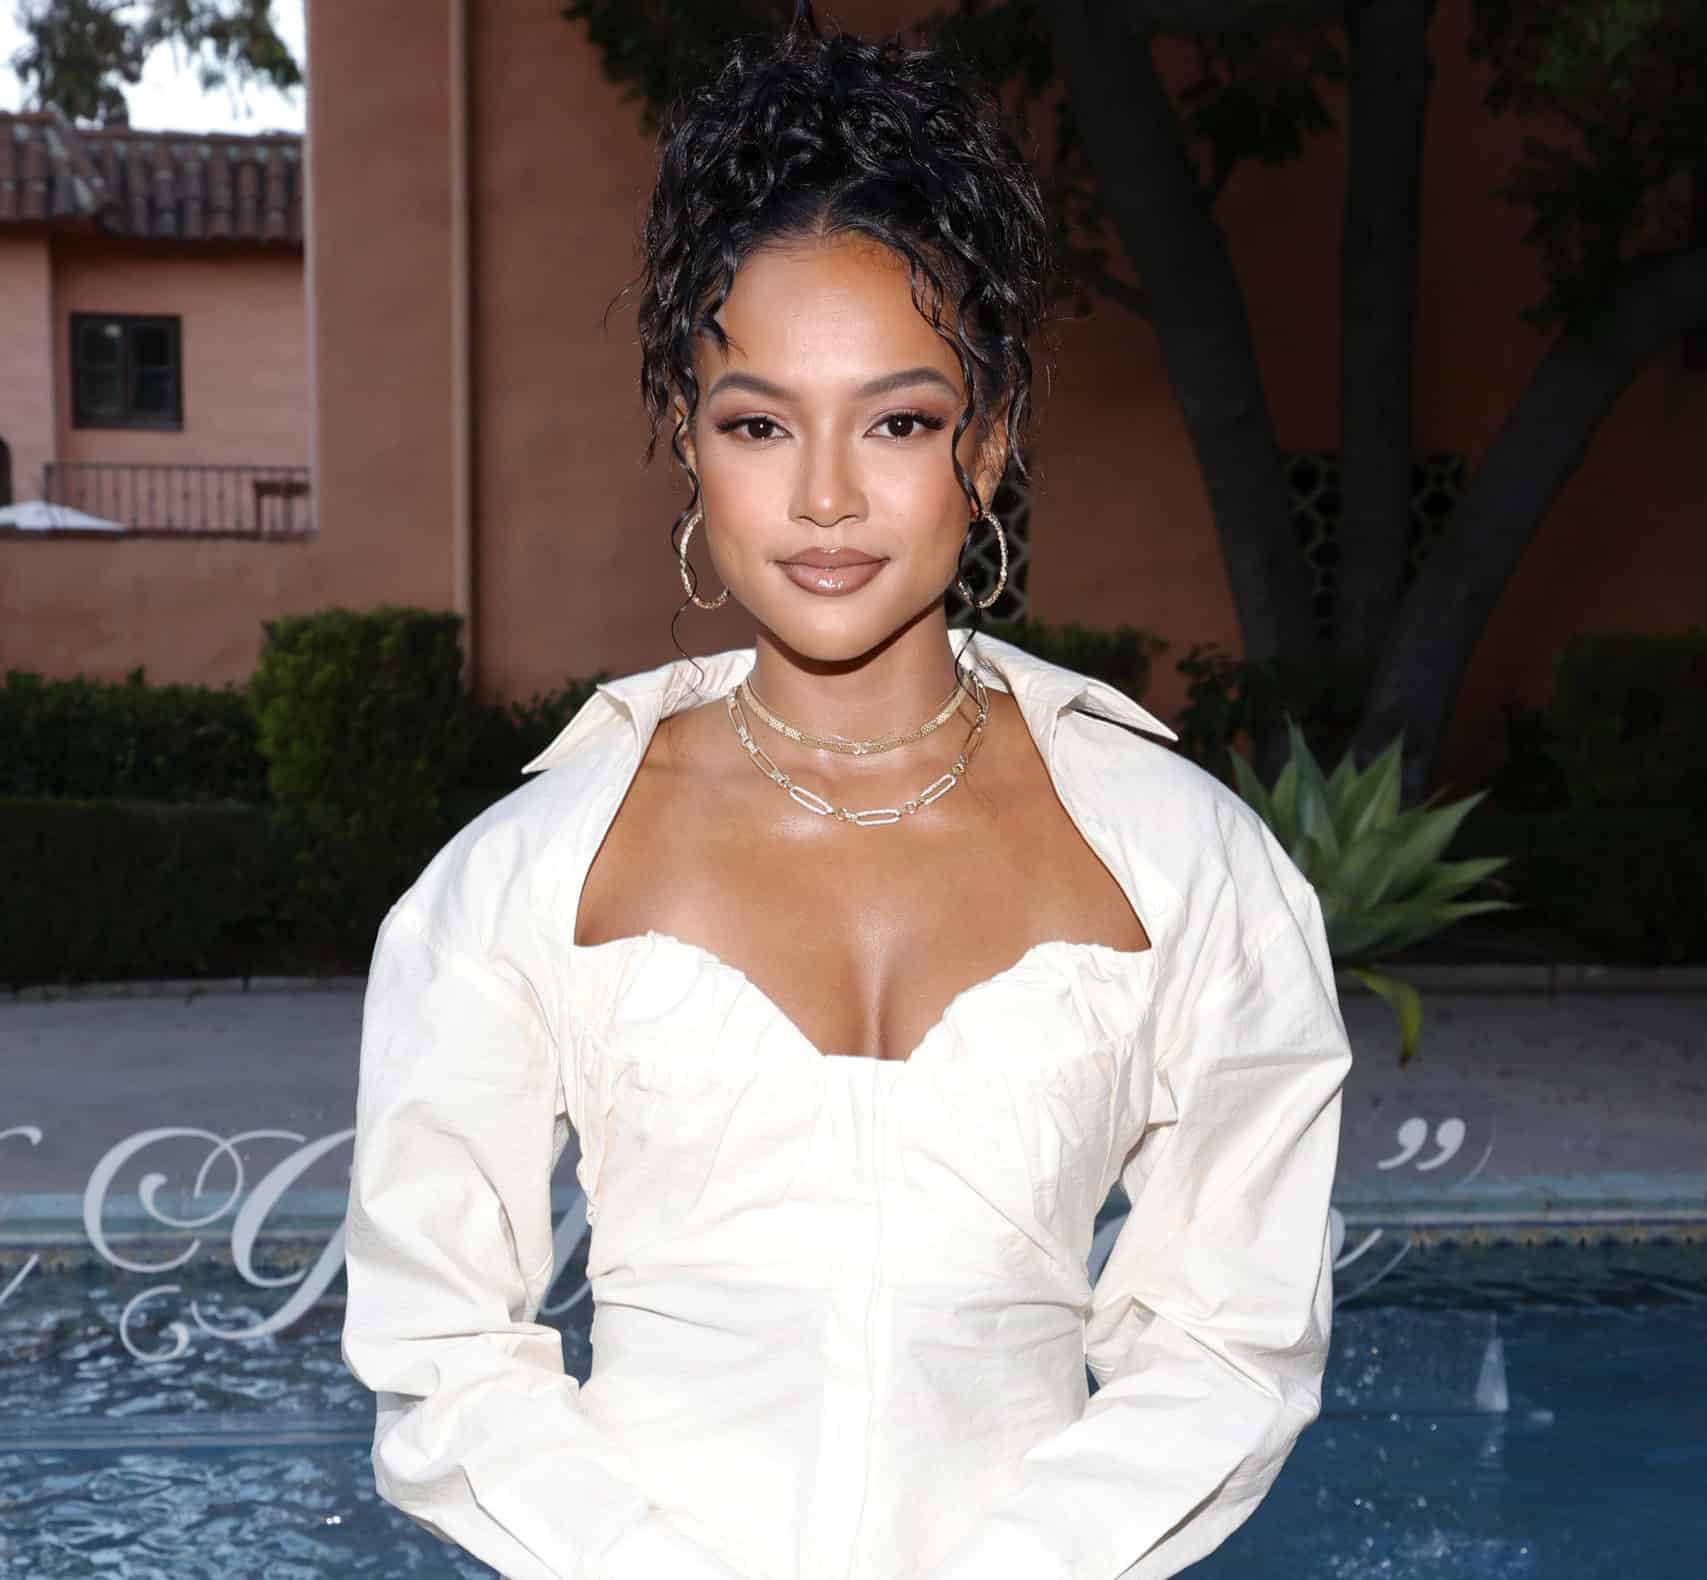 Karrueche Tran has won an Emmy for Outstanding Performance By A Lead Actress In A Daytime Fiction Program for her role on "The Bay."